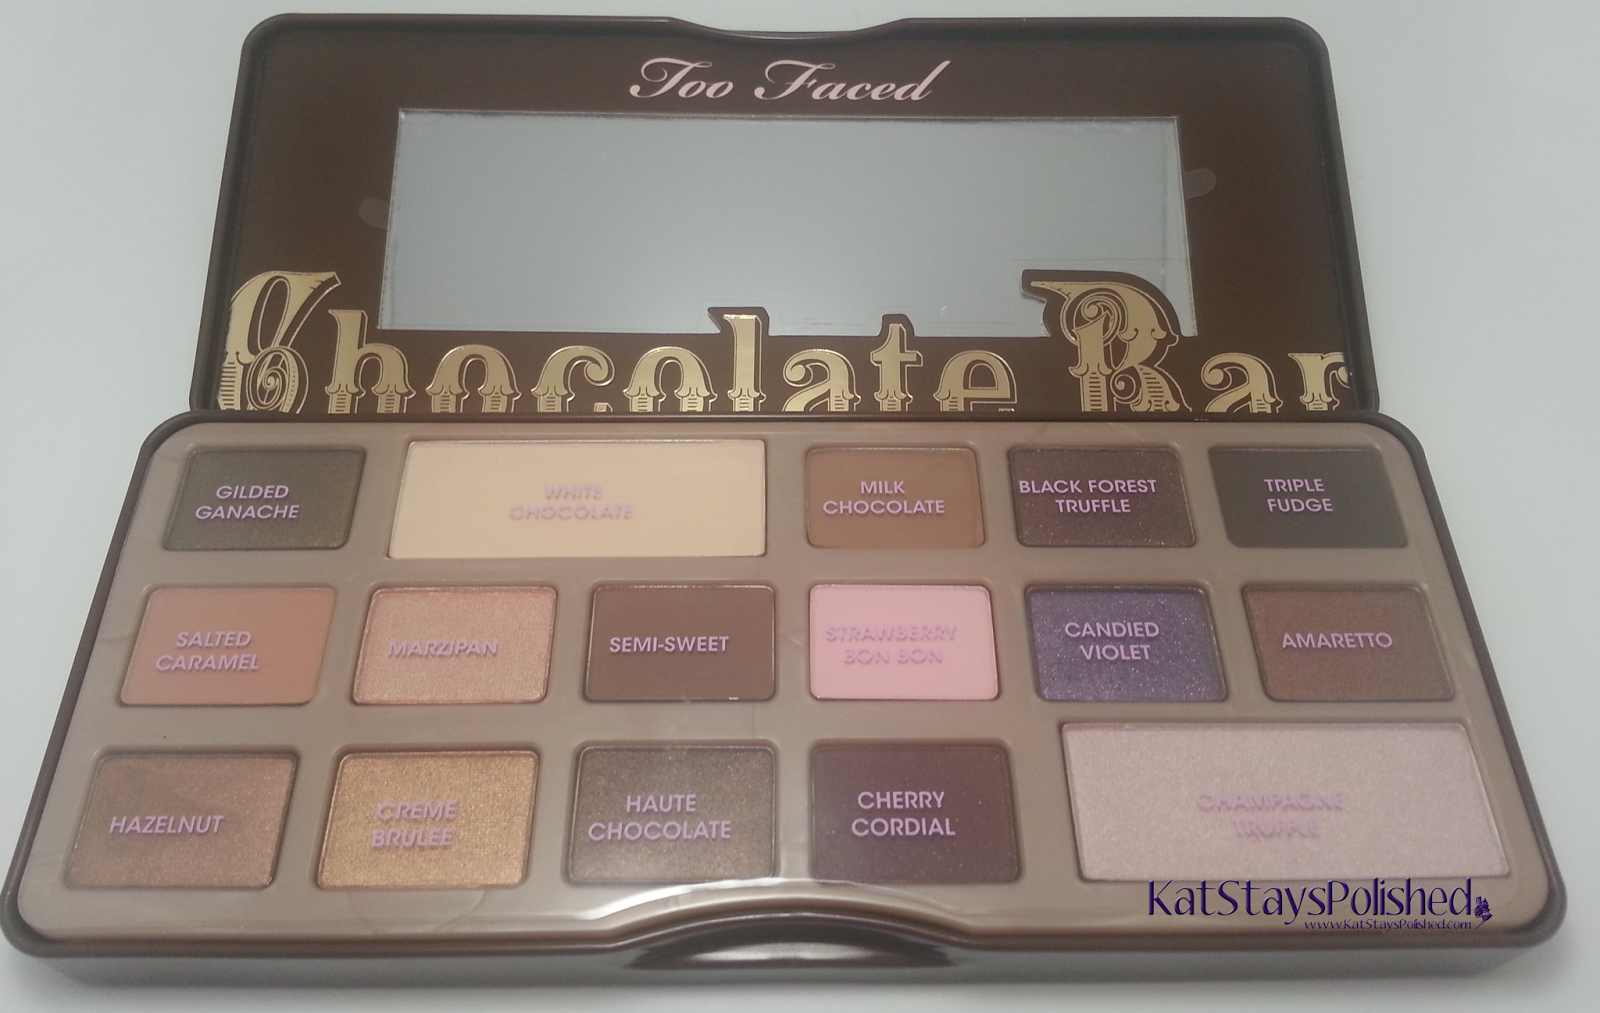 Too Faced Chocolate Bar Palette | Kat Stays Polished